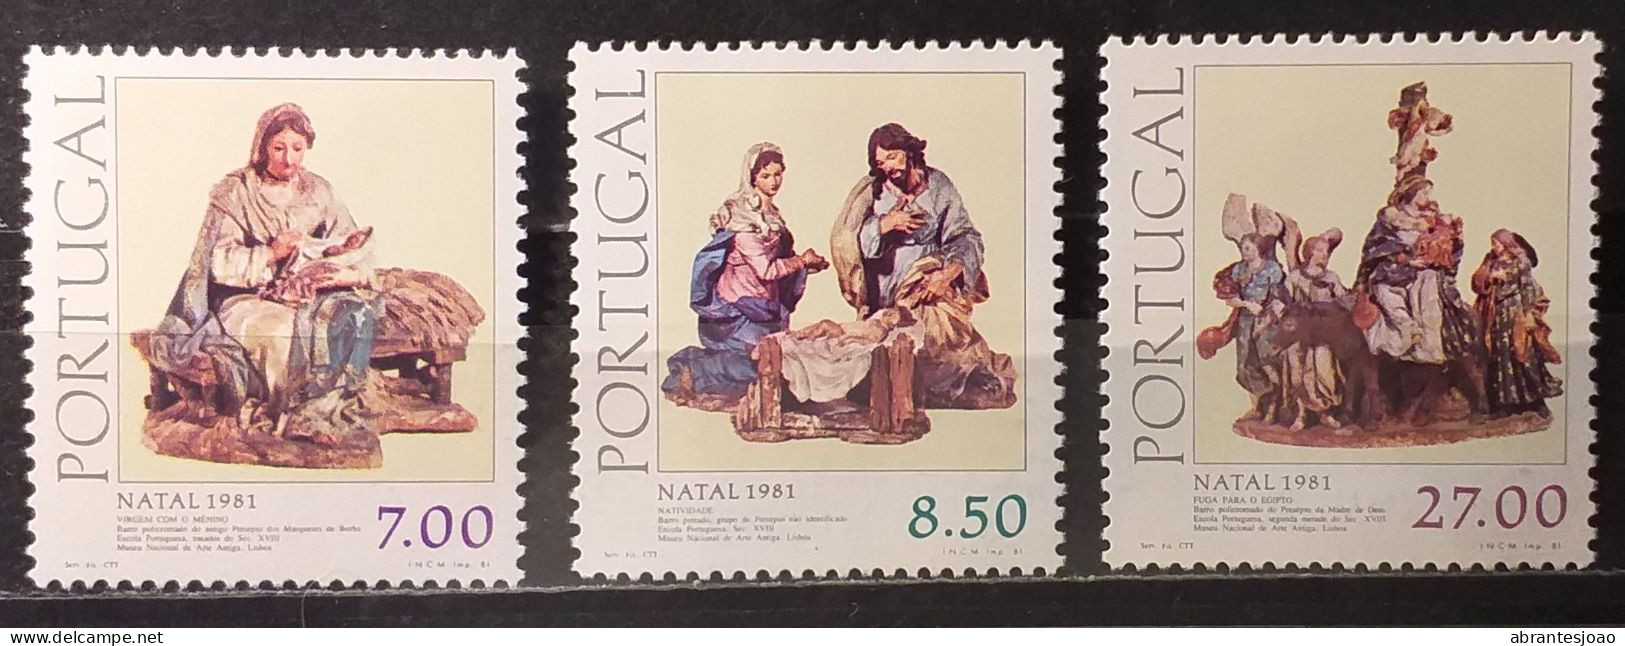 1981 - Portugal - MNH - 5th. Centenary Of Access Of King John II To The Throne + Christmas - 5 Stamps - Unused Stamps